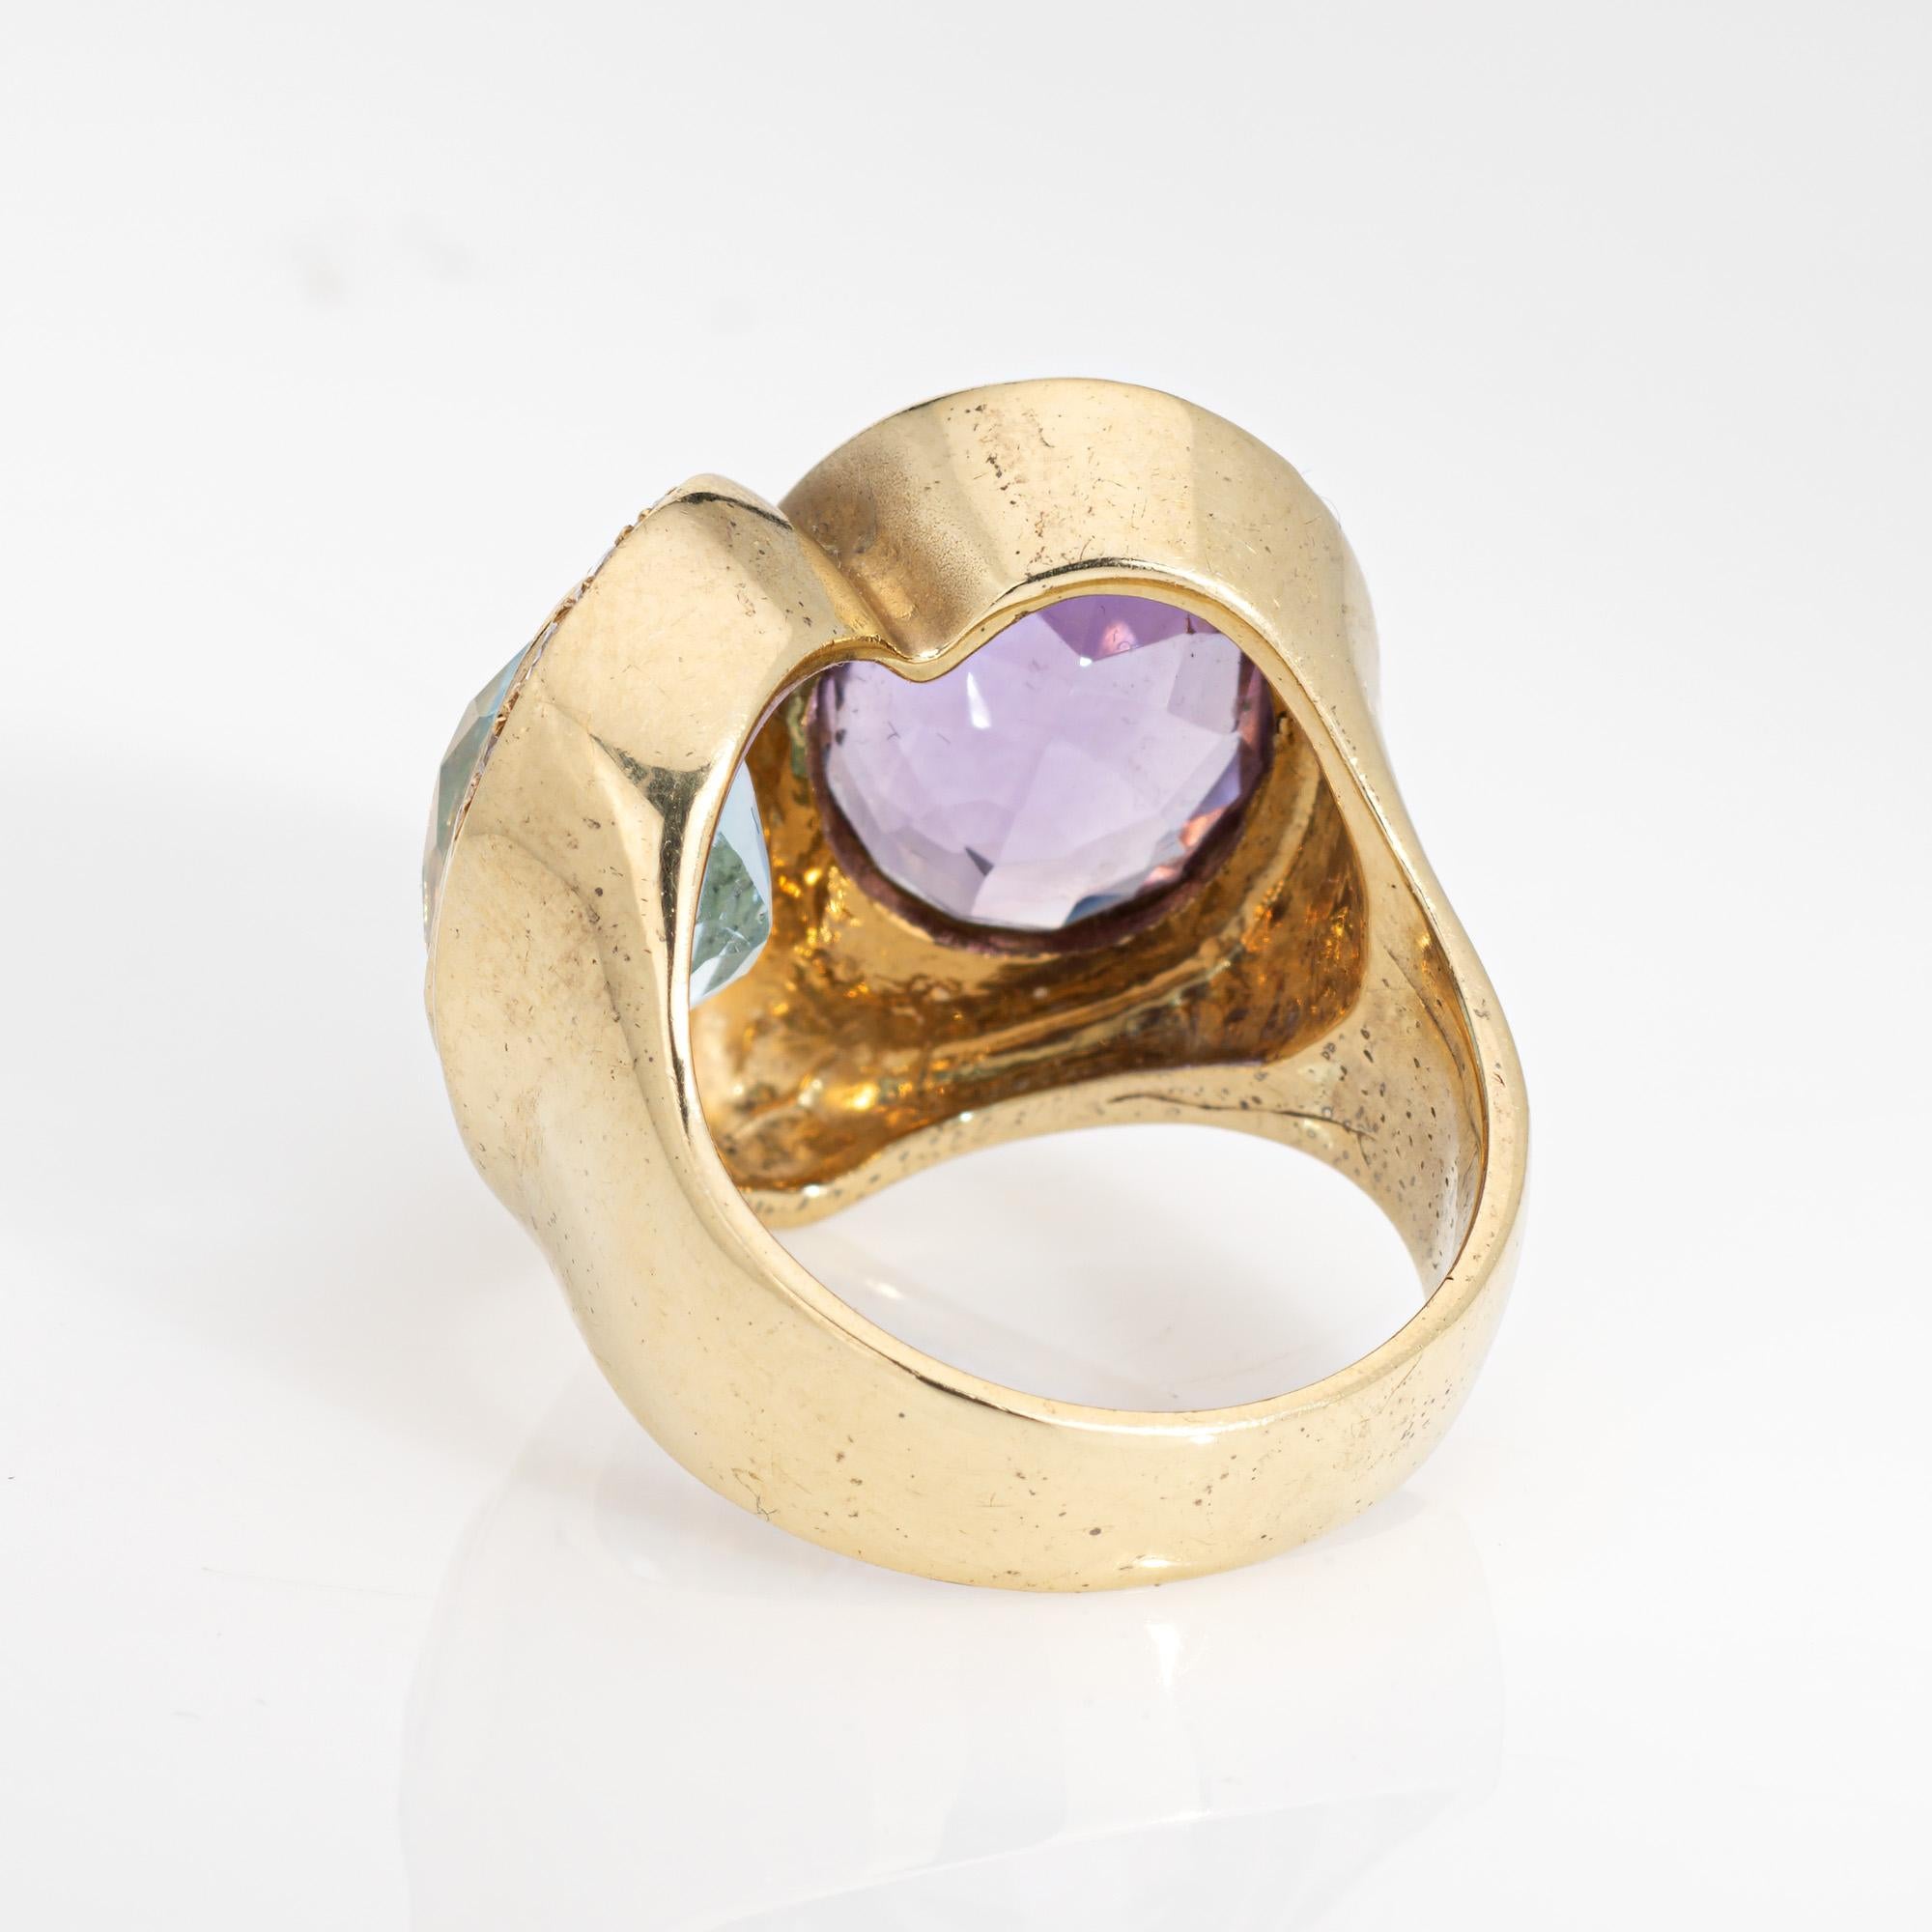 Vintage Owl Ring Amethyst Blue Topaz Diamond 14k Yellow Gold Sz 6 Wide Band In Good Condition For Sale In Torrance, CA